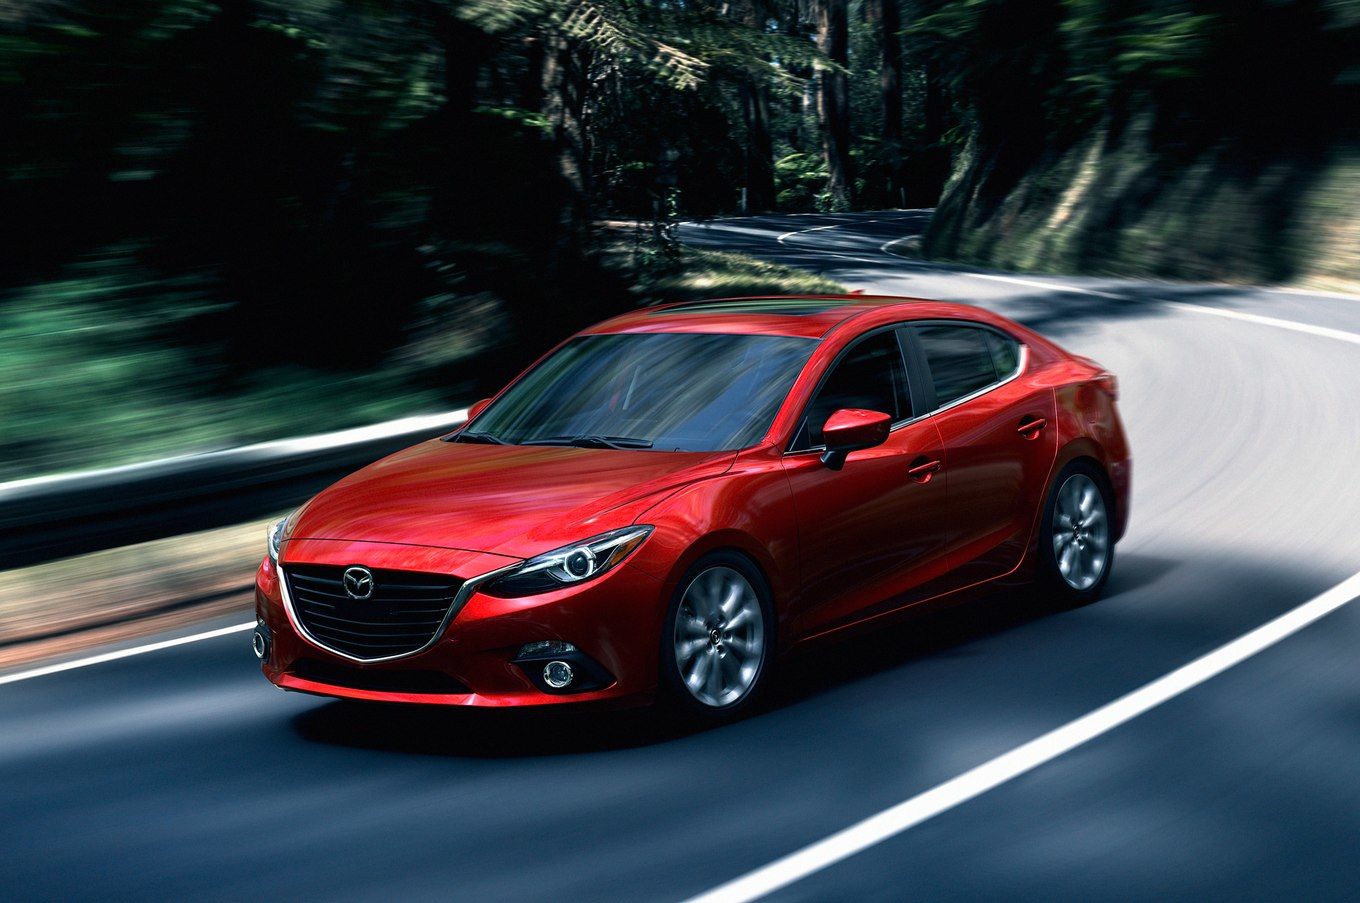 The 2014 Mazda3’s End of Summer Road Trip from Hiroshima to Frankfurt